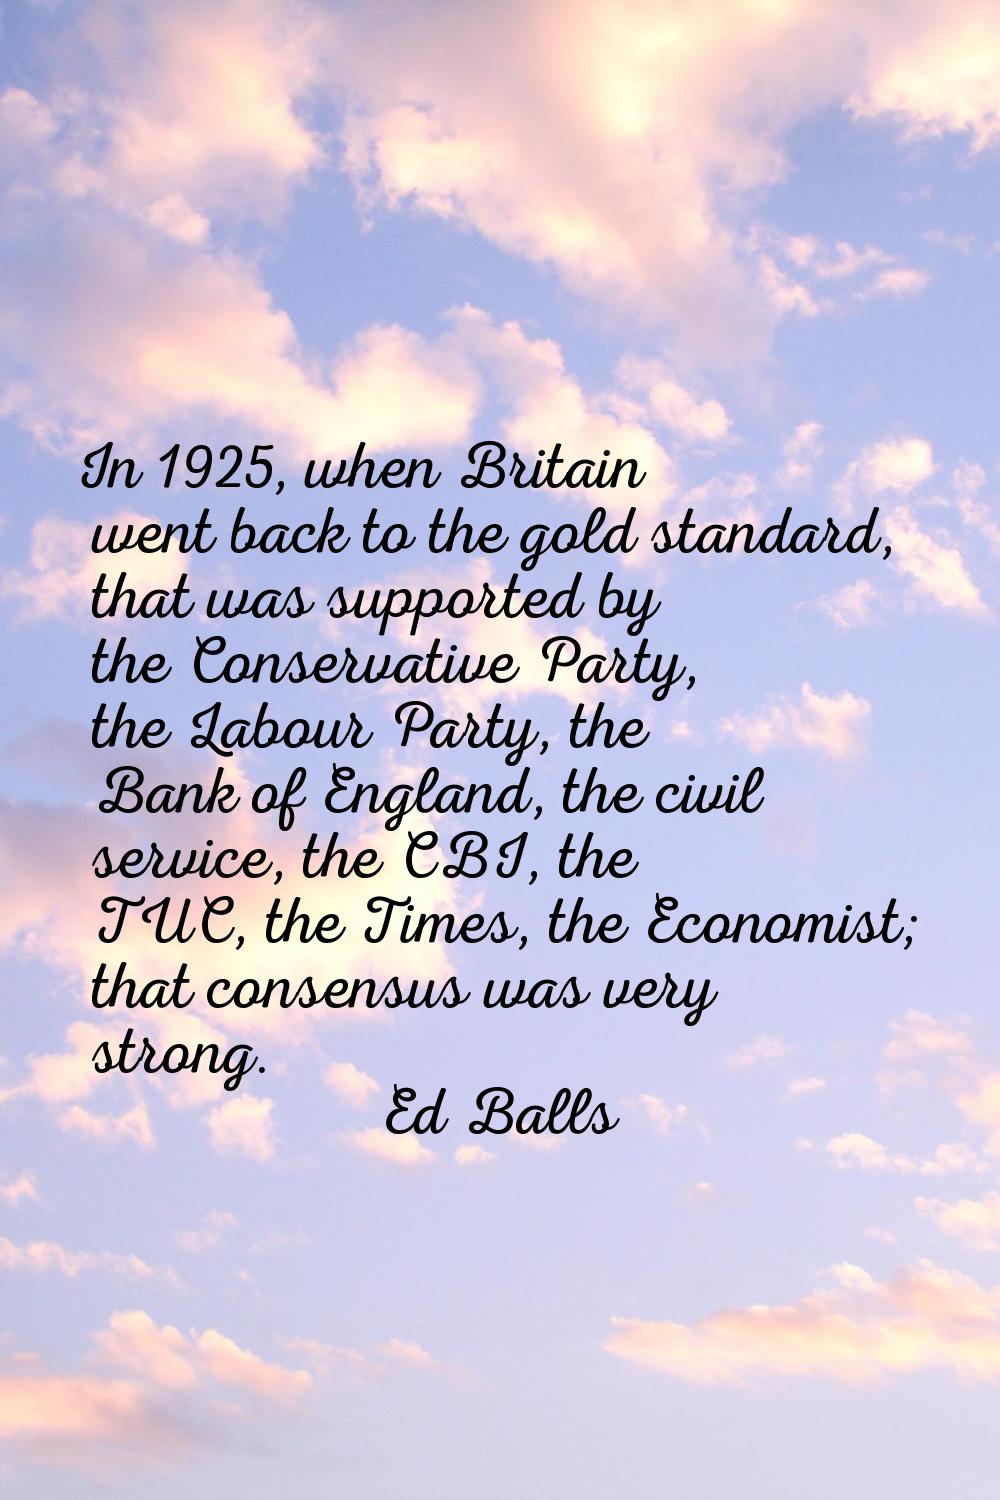 In 1925, when Britain went back to the gold standard, that was supported by the Conservative Party,